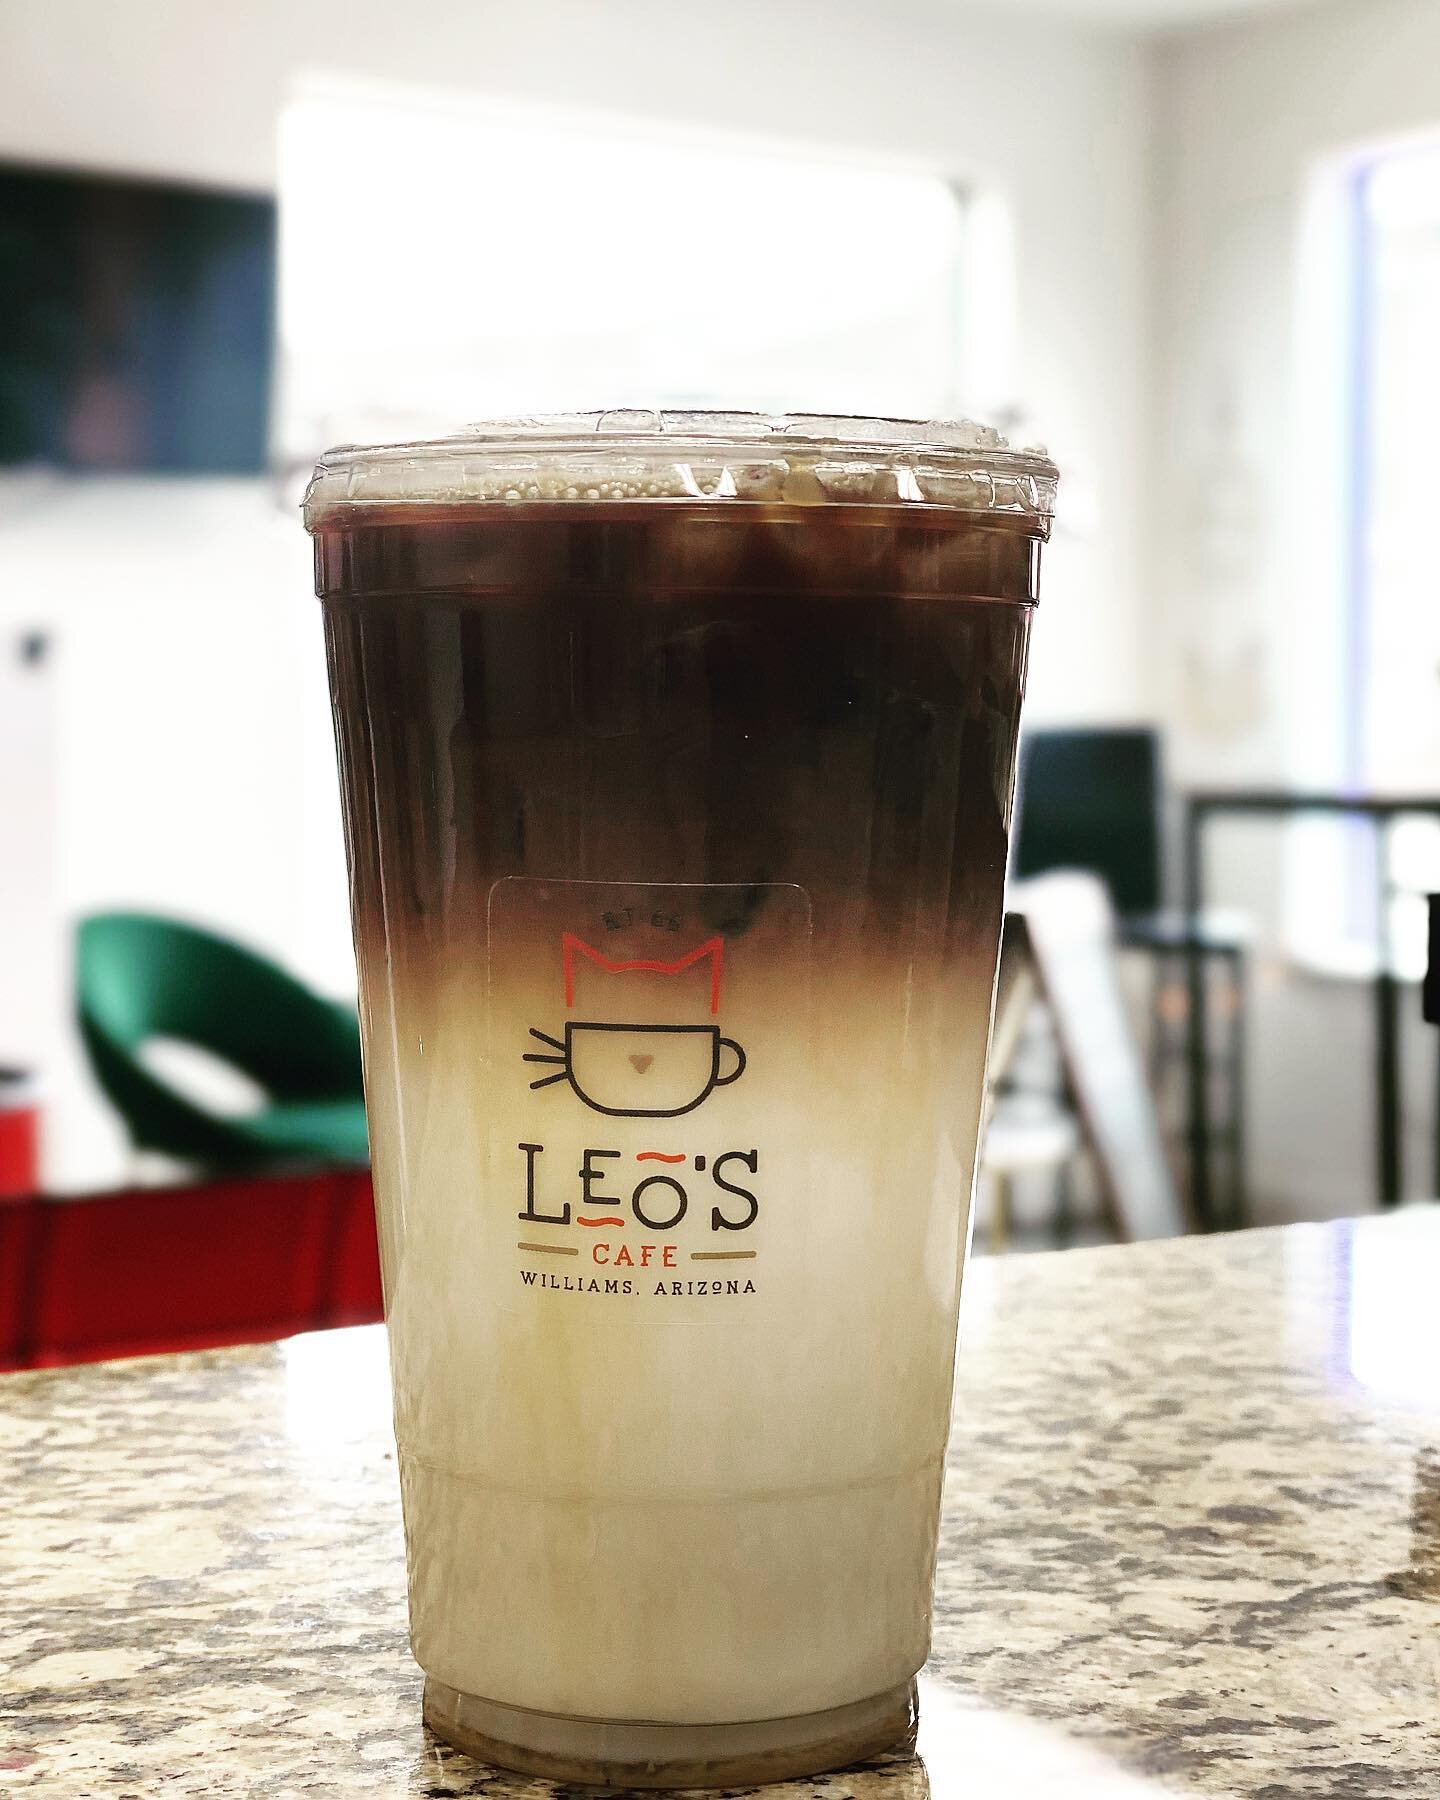 If you could create any drink with any flavor, what would YOU create? 🤔
.
.
#leoscafe #leoscafeaz #williams #williamsaz #route66 #grandcanyon #coffee #barista #tea #cafe